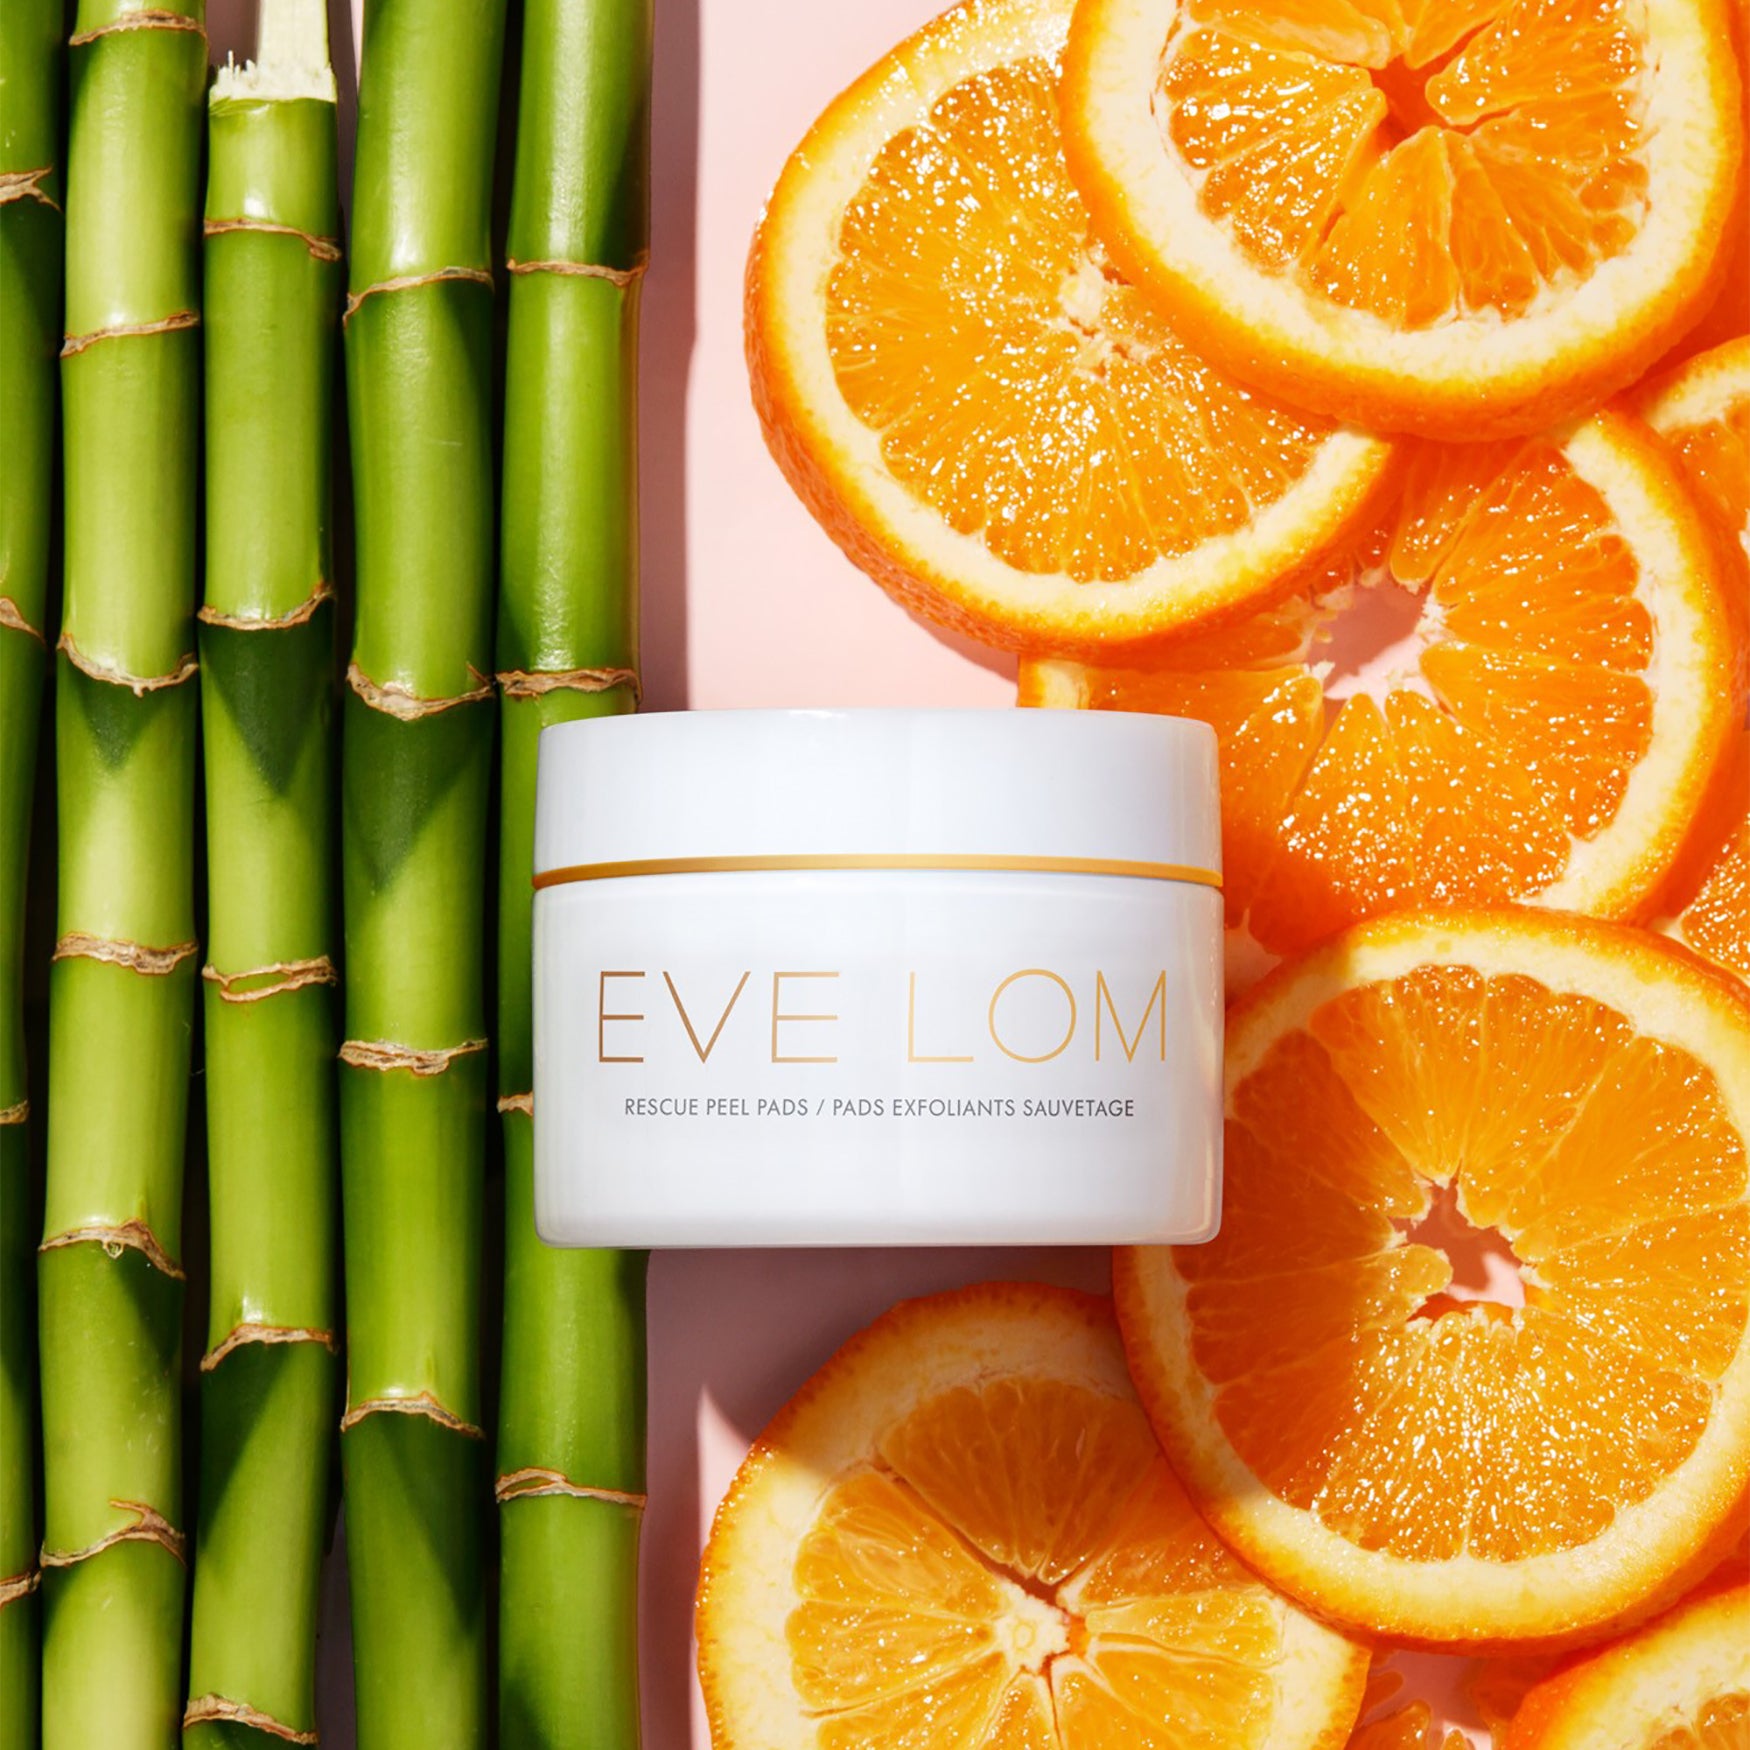 11 New Vitamin C-Infused Products For Glowing Skin